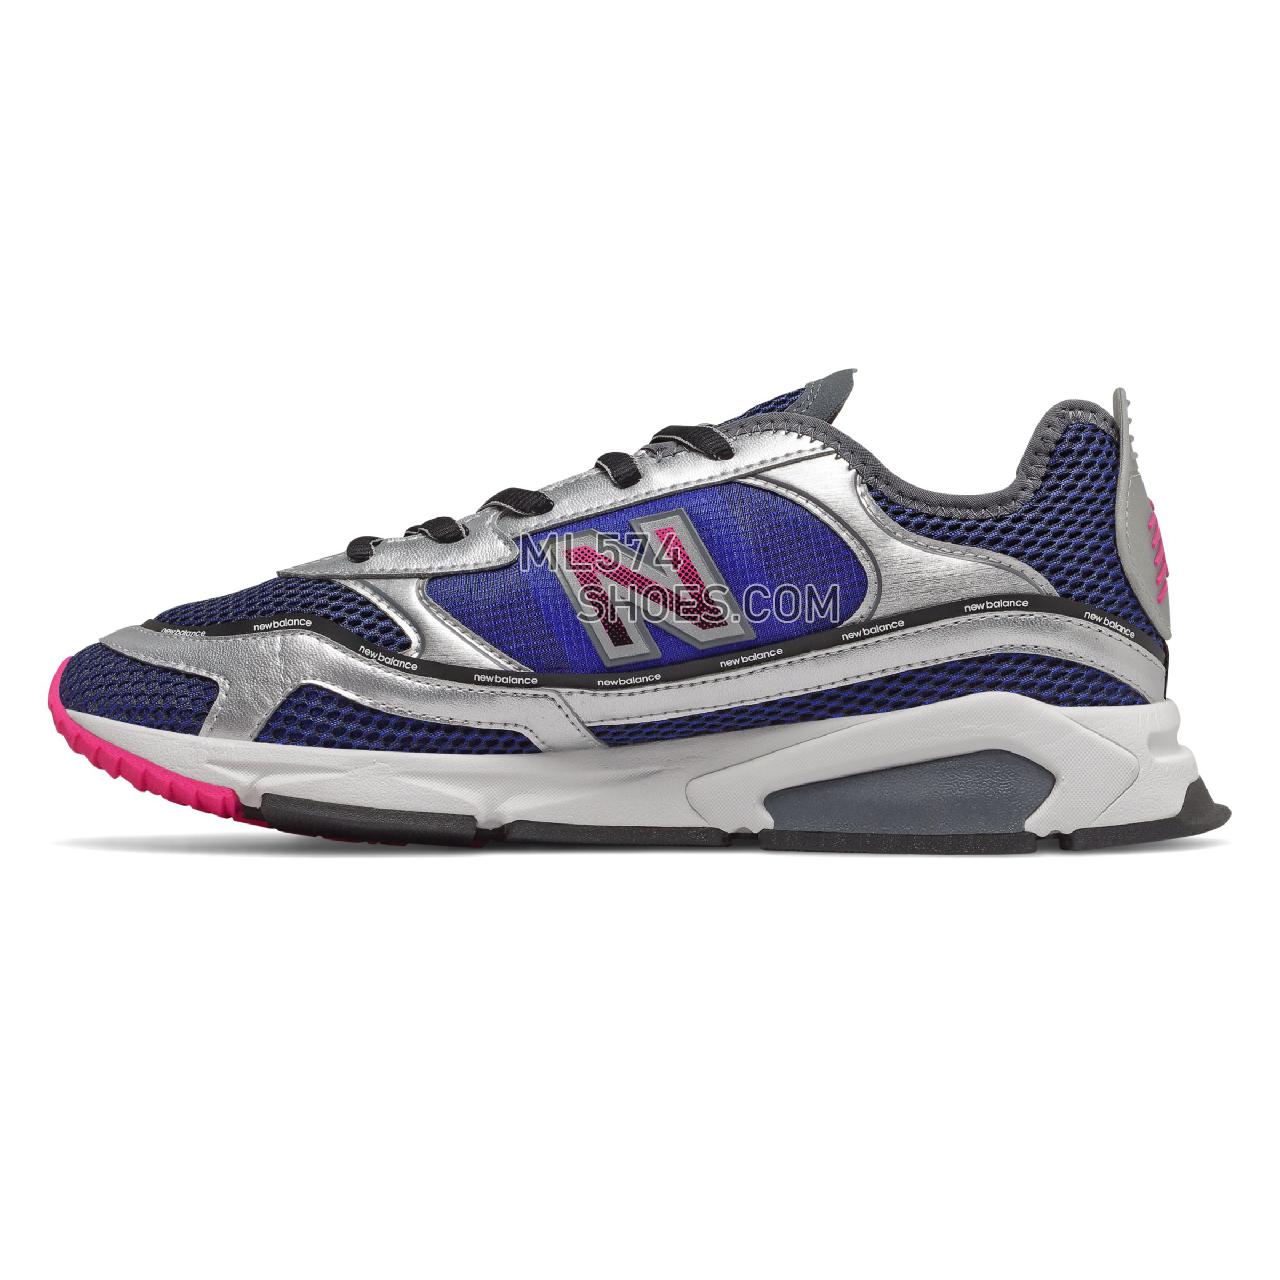 New Balance X-Racer - Men's Sport Style Sneakers - Team Royal with Silver Metallic - MSXRCSNF